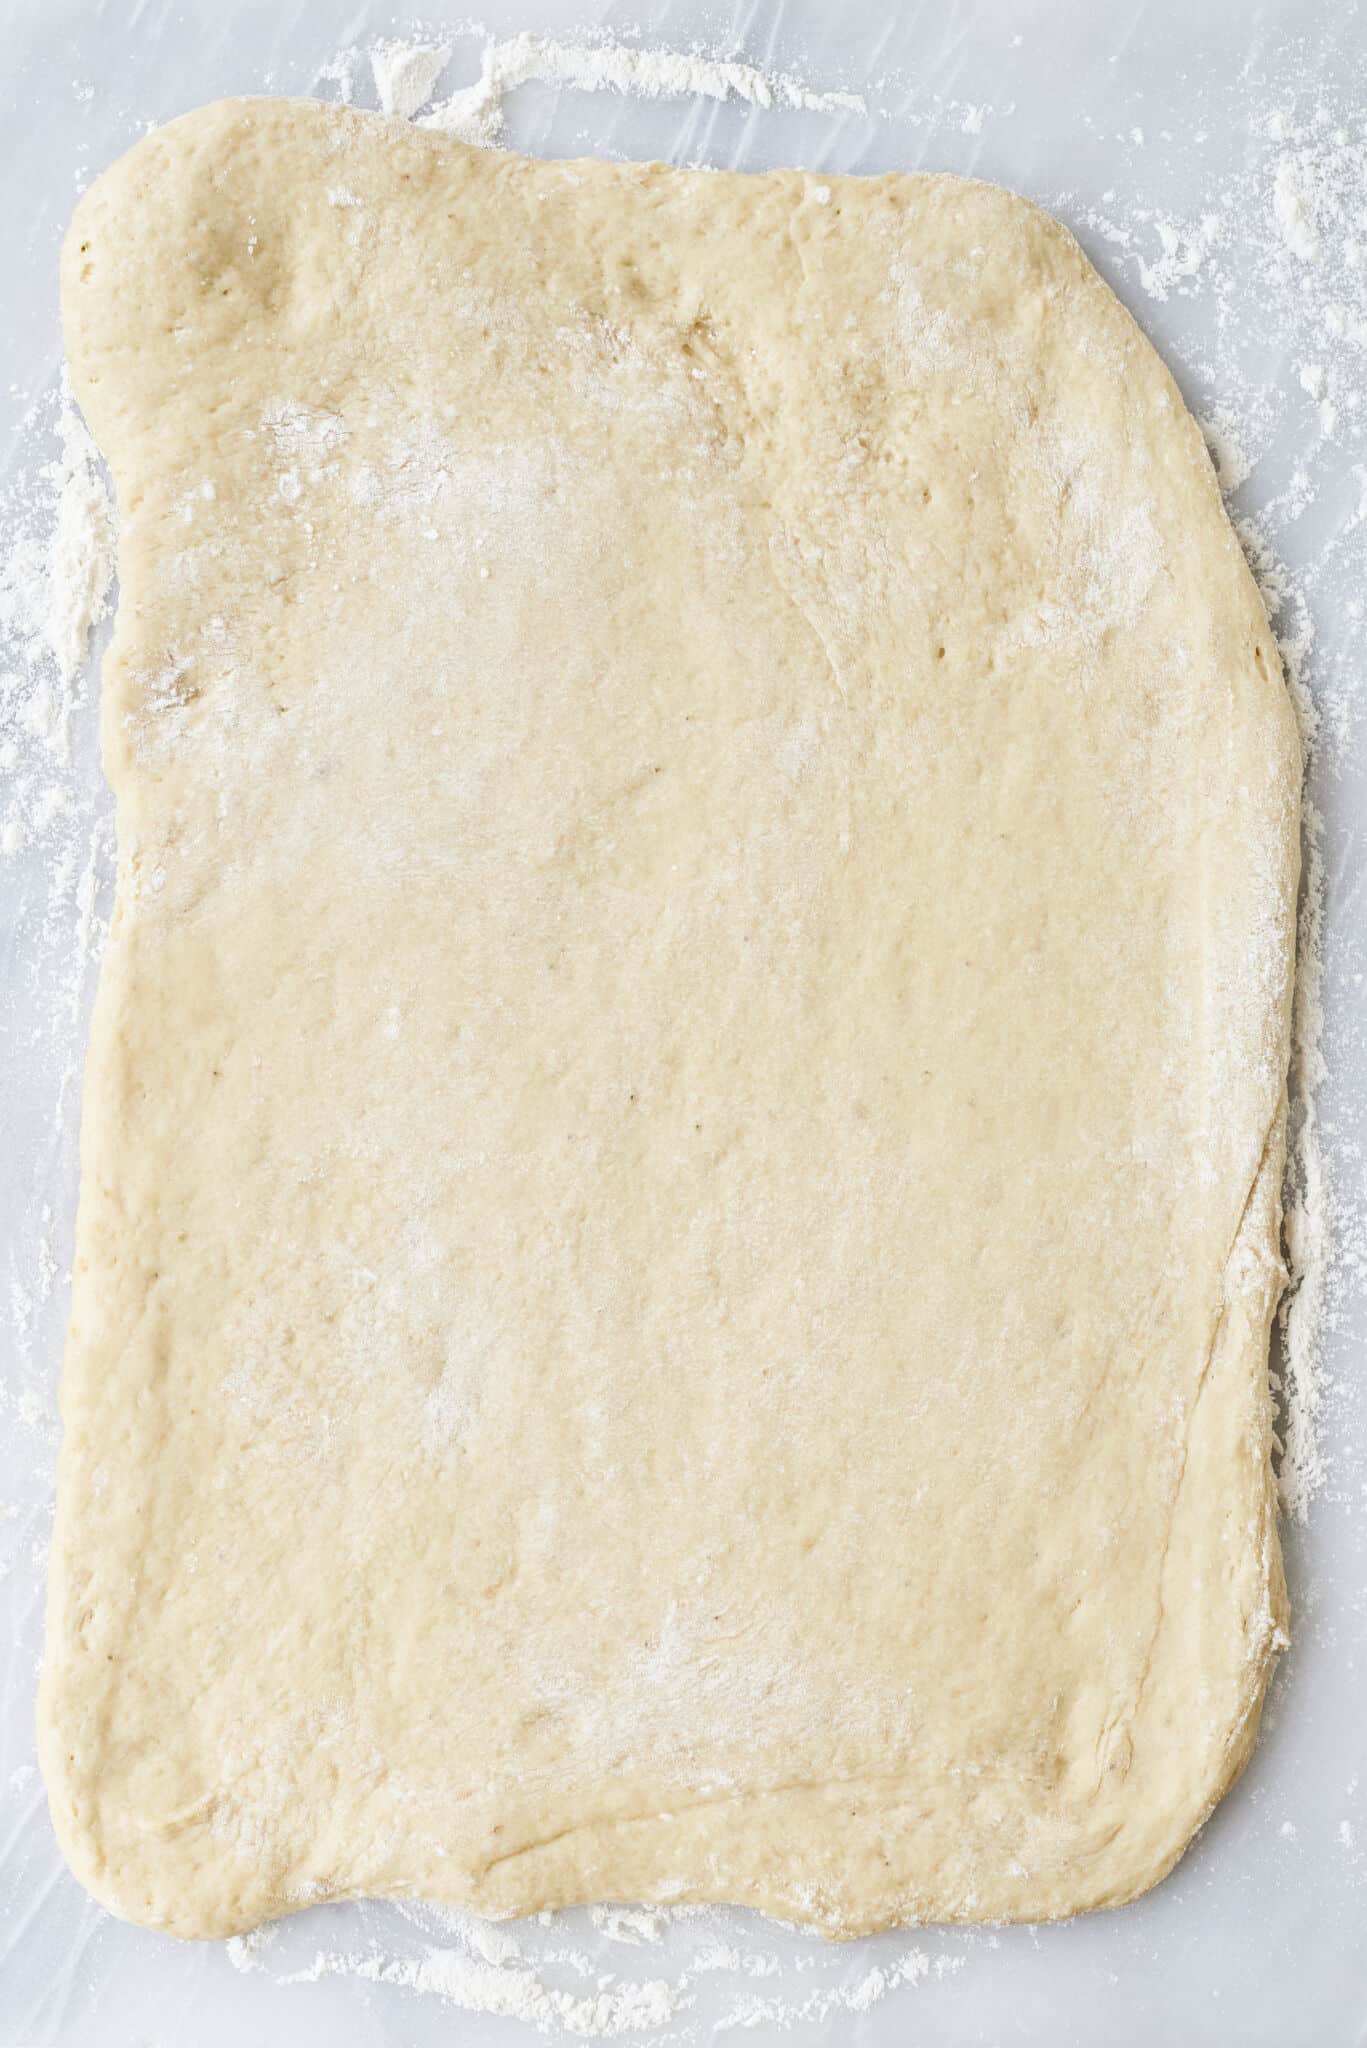 A well-proofed sofa dough is rolled into a rectangular shaped on the floured surface. 